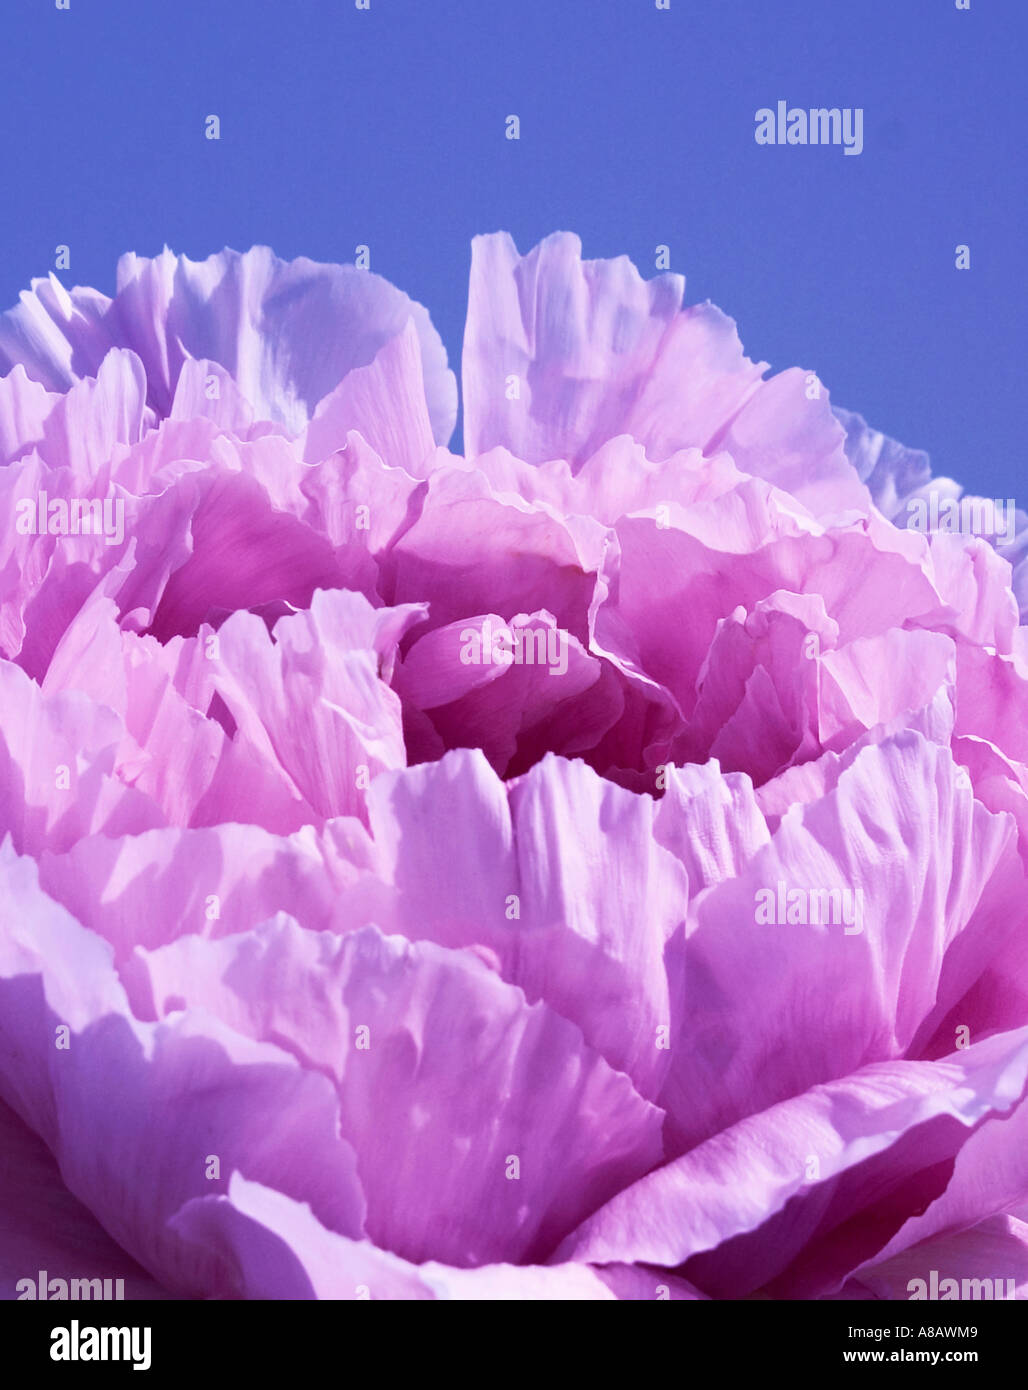 Close up shot of pink tree peony 'tree paeonia' against a vivid blue background Stock Photo